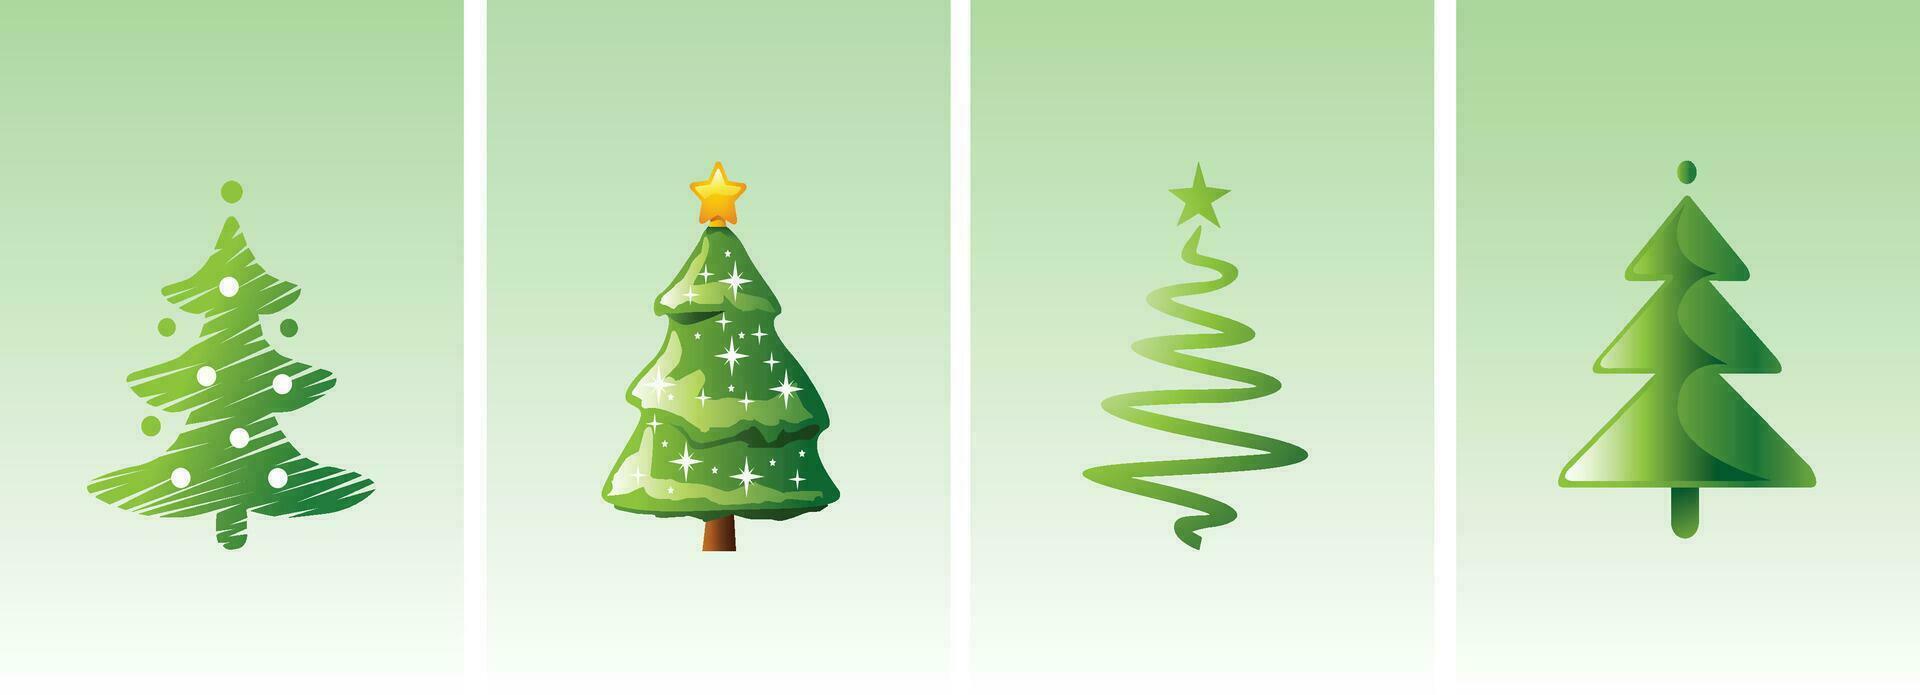 Collection of green Christmas trees with stars in a green box. Christmas tree vector 3d illustration